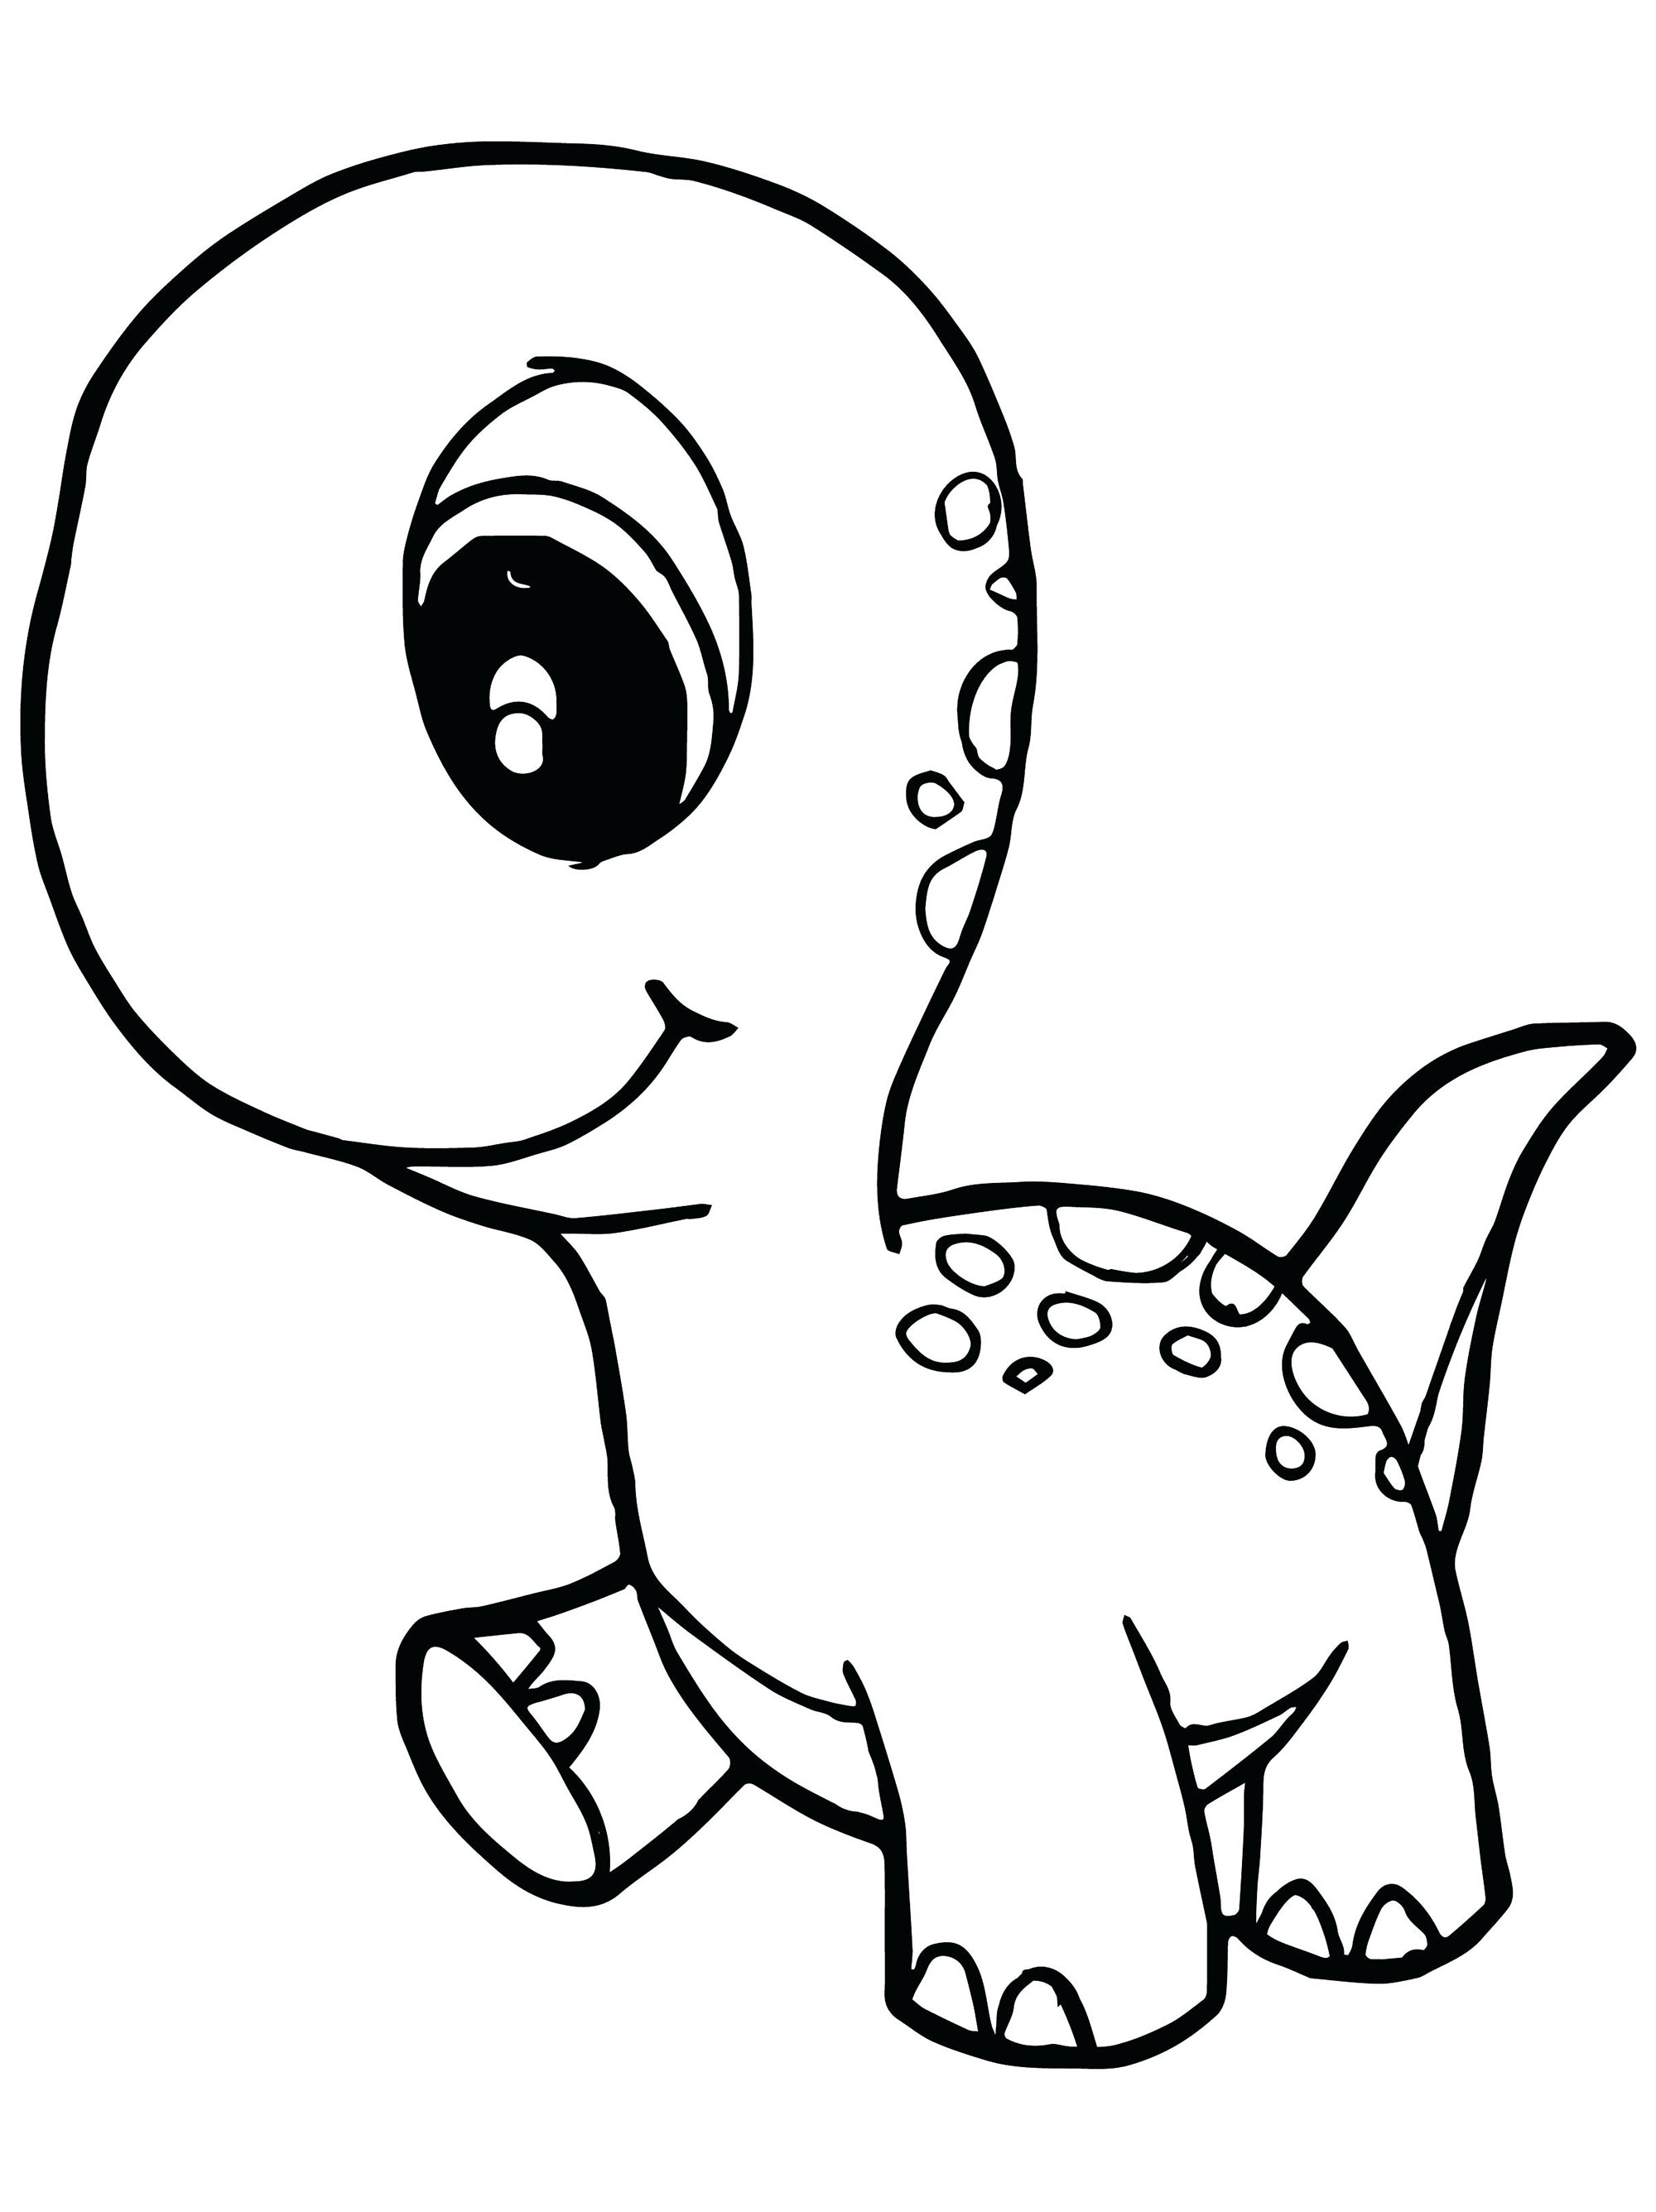 Download Dinosaurs To Download Ba Dinosaurs Kids Coloring Pages